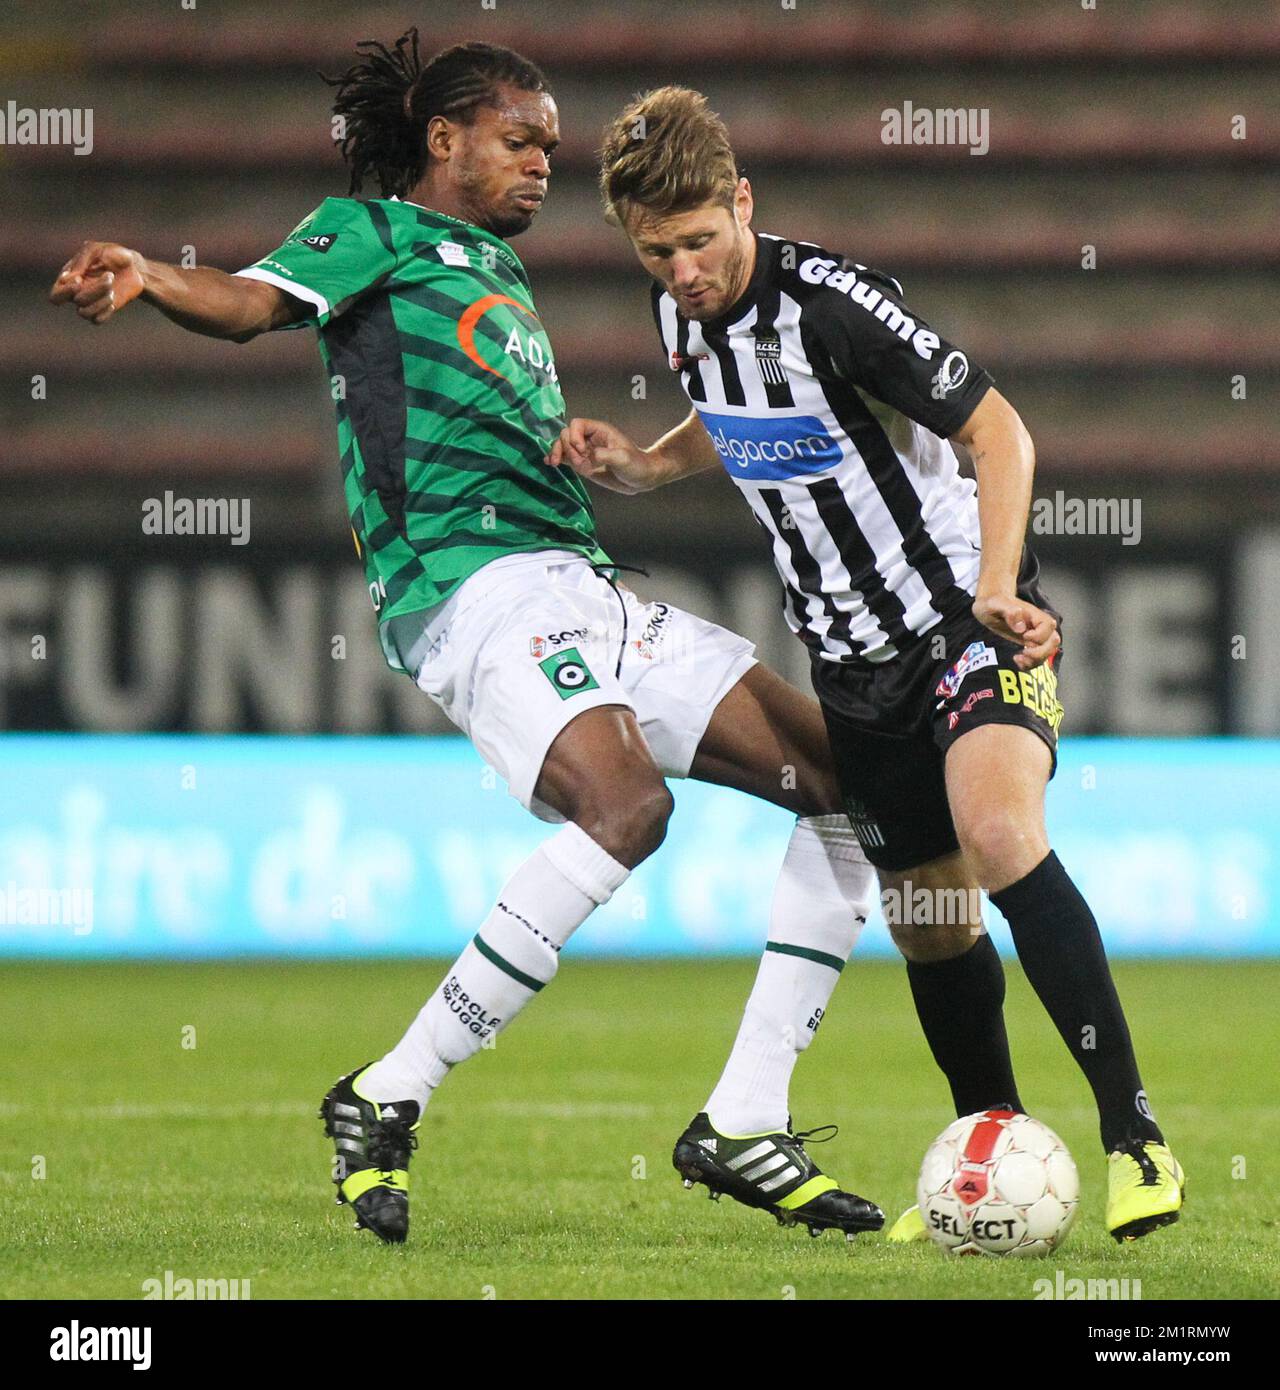 Cercle's Michael Uchebo and Charleroi's Damien Marcq fight for the ball during the Jupiler Pro League match between Sporting Charleroi and Cercle Brugge KSV, in Charleroi, Saturday 21 September 2013, on day 8 of the Belgian soccer championship. BELGA PHOTO VIRGINIE LEFOUR Stock Photo